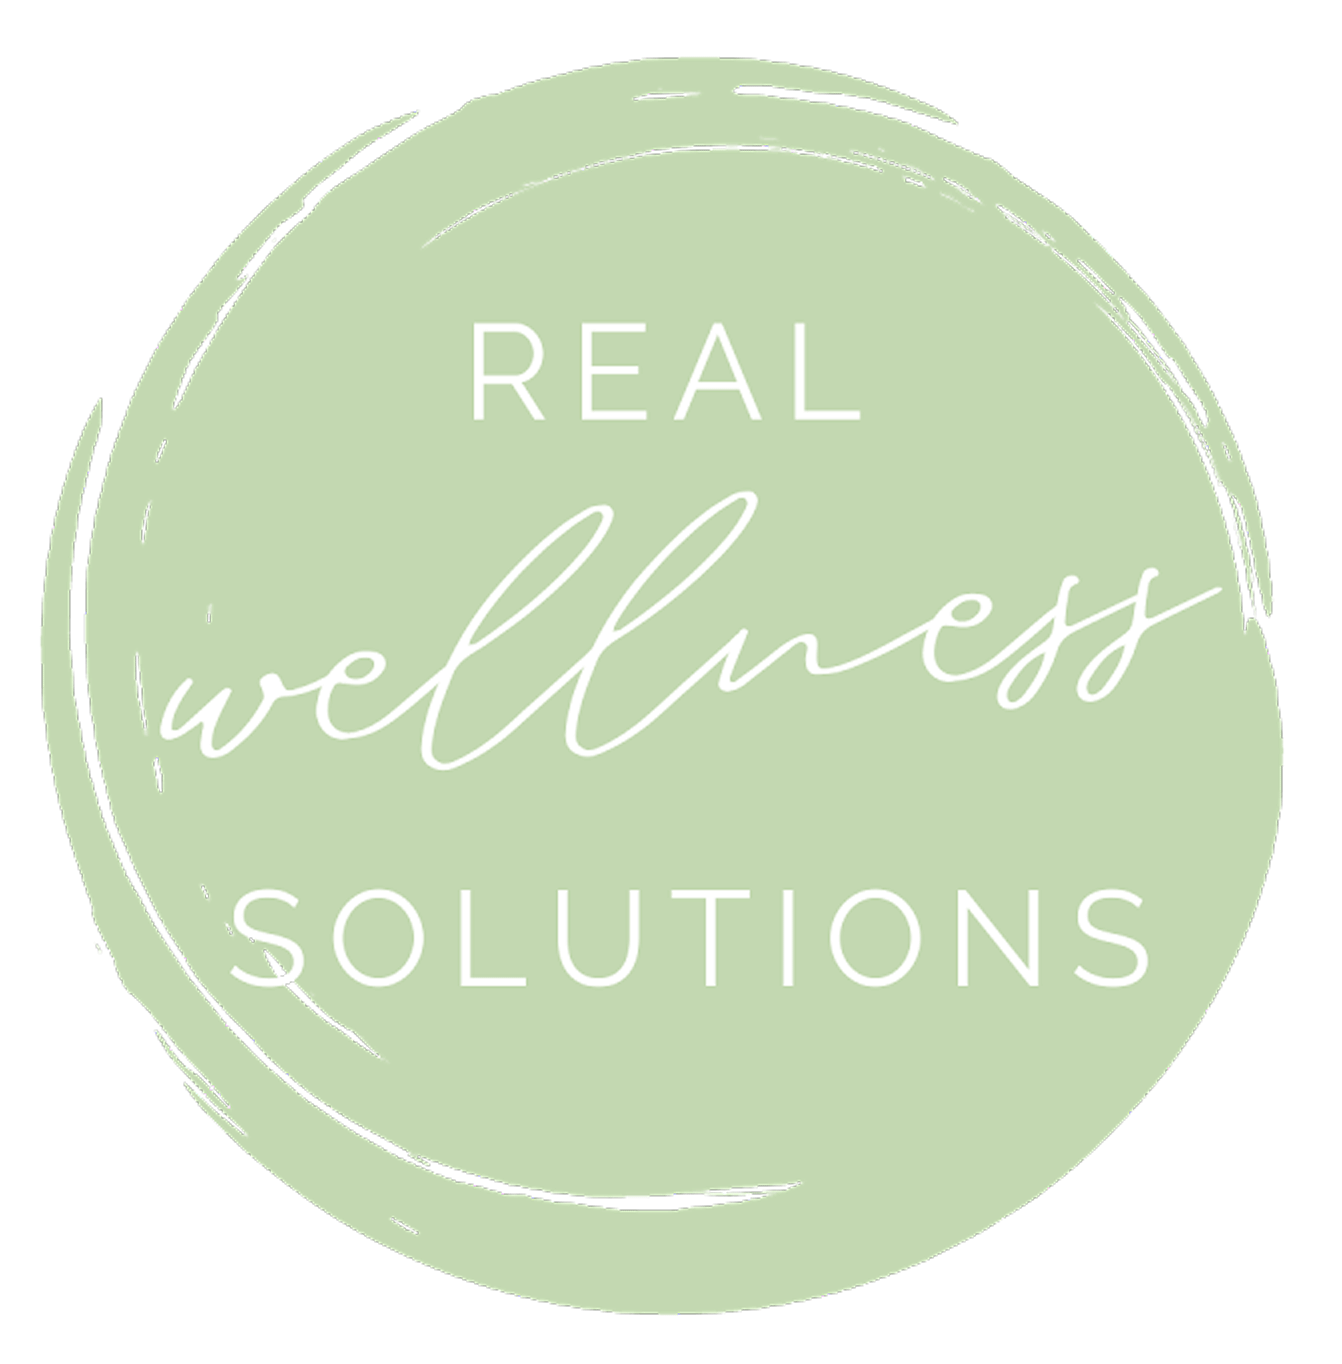 Real Wellness Solutions